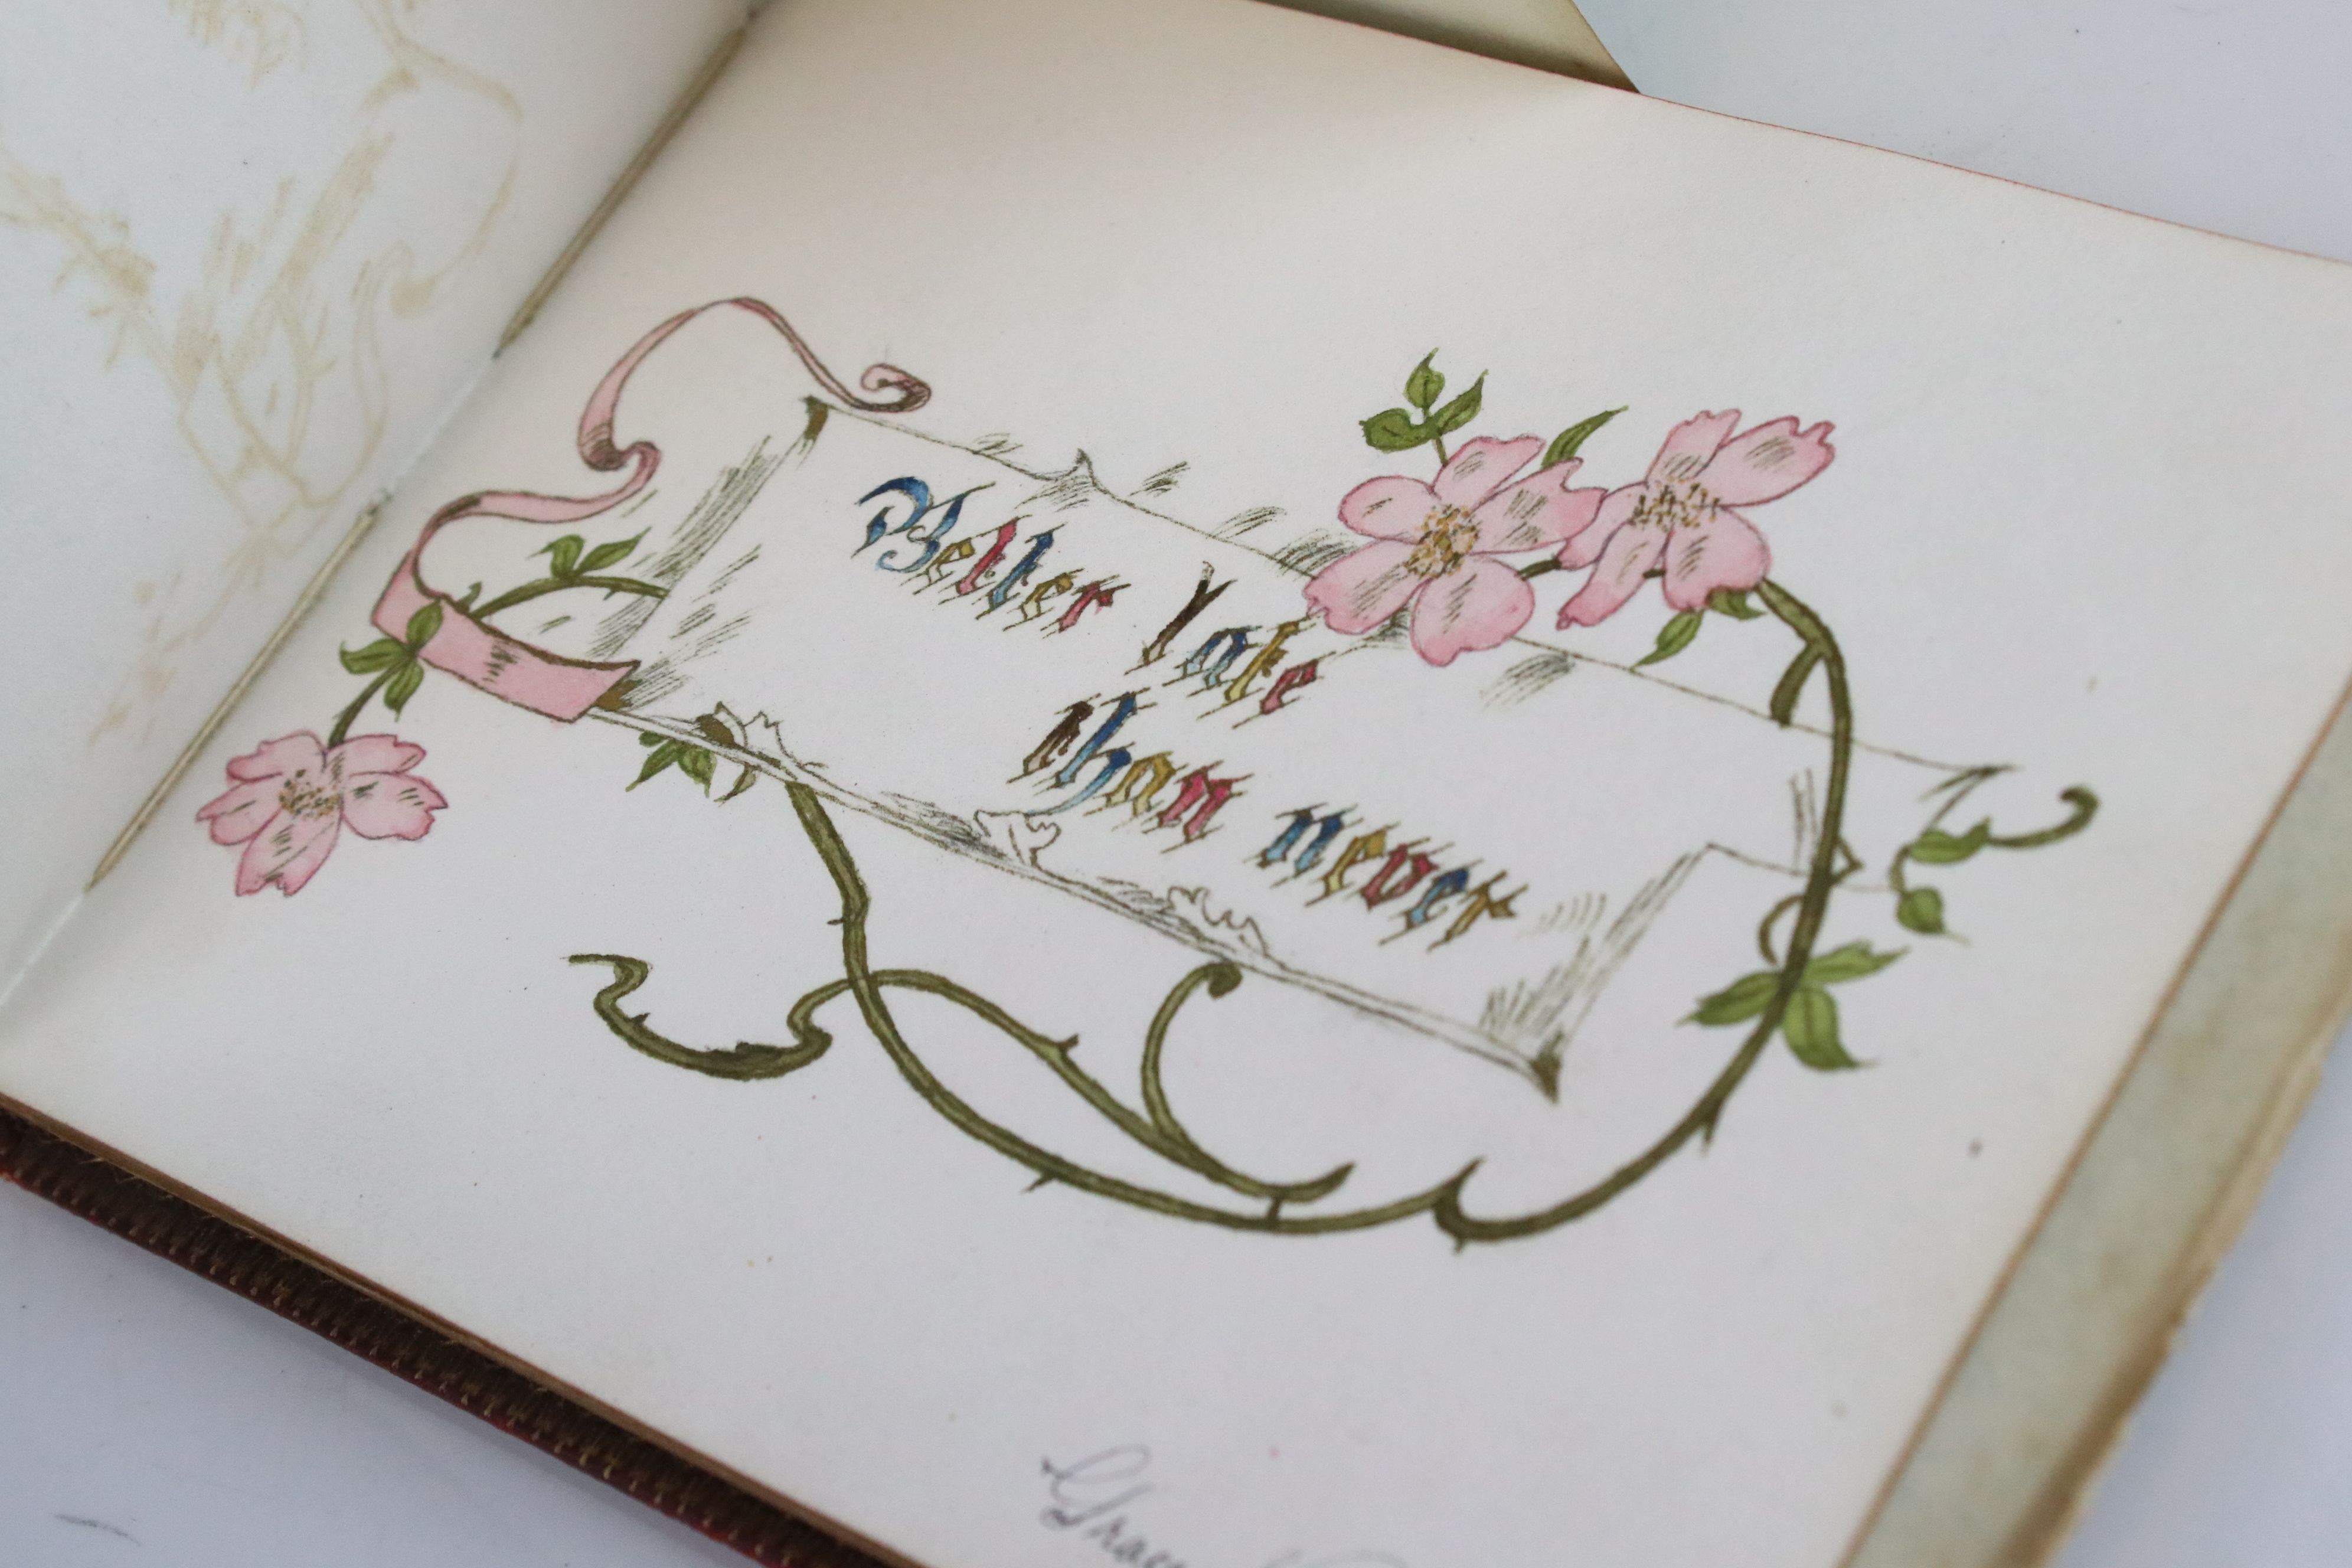 Victorian Sketchbook / Album belonging to Ann Nunney containing mainly verses dating from 1879 - Image 4 of 17